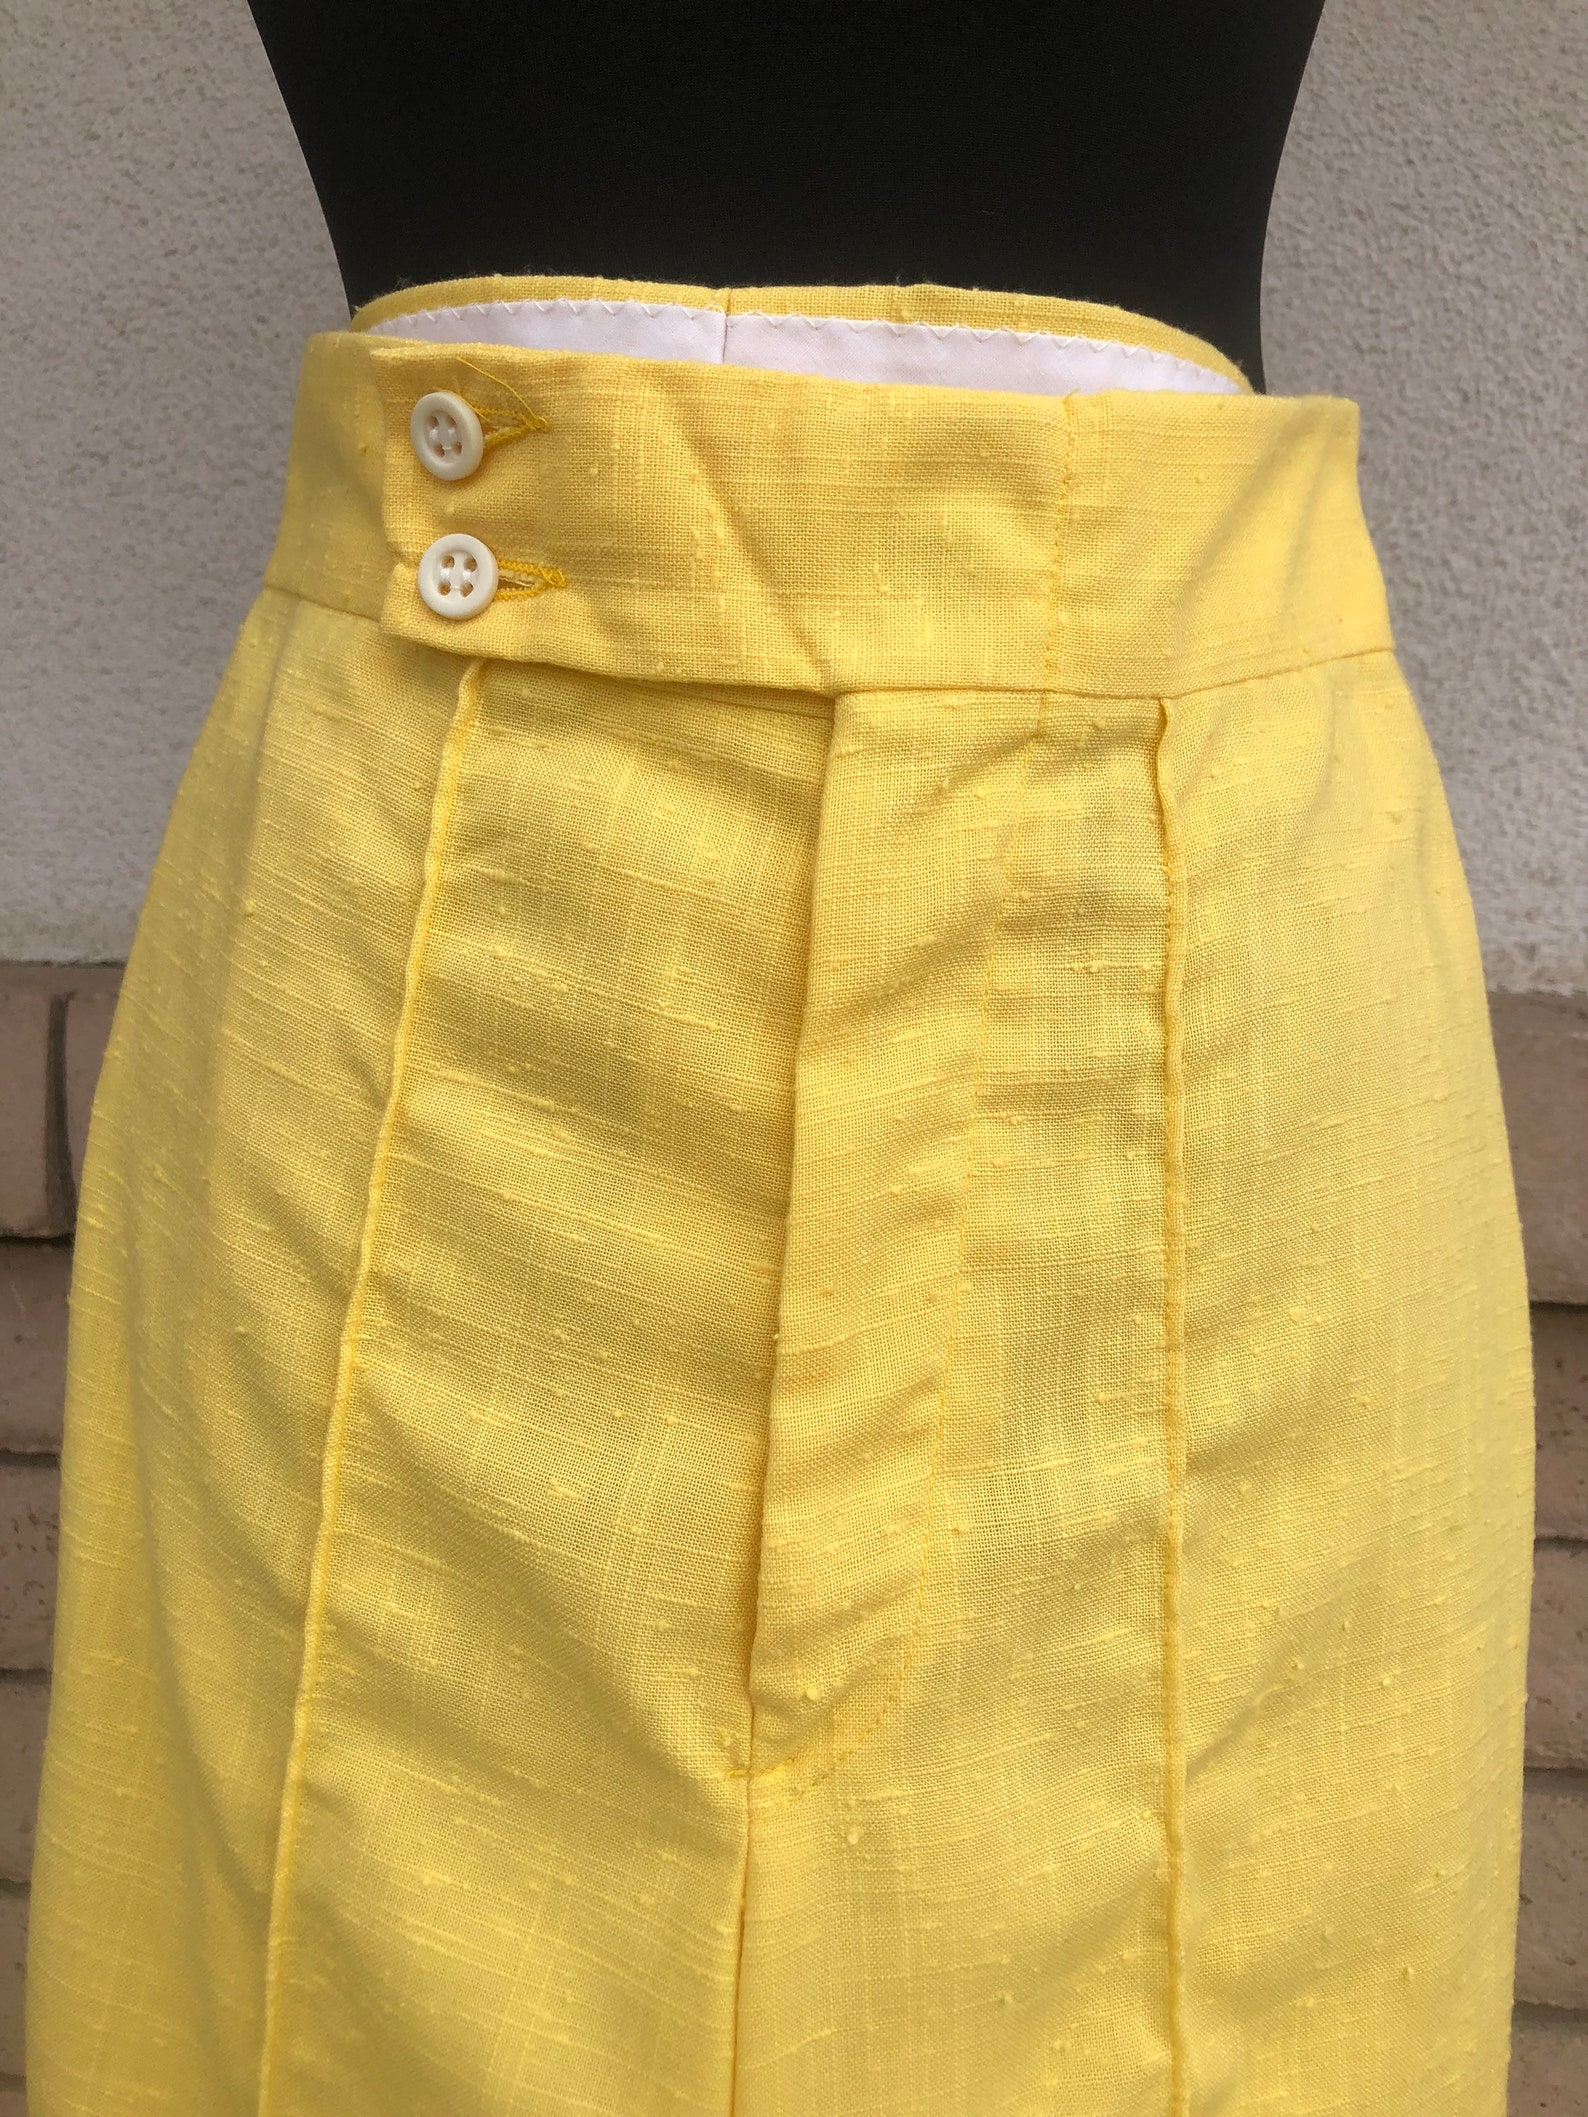 70s Sunshine Yellow Bell Bottoms High Waisted Pants Creased - Etsy